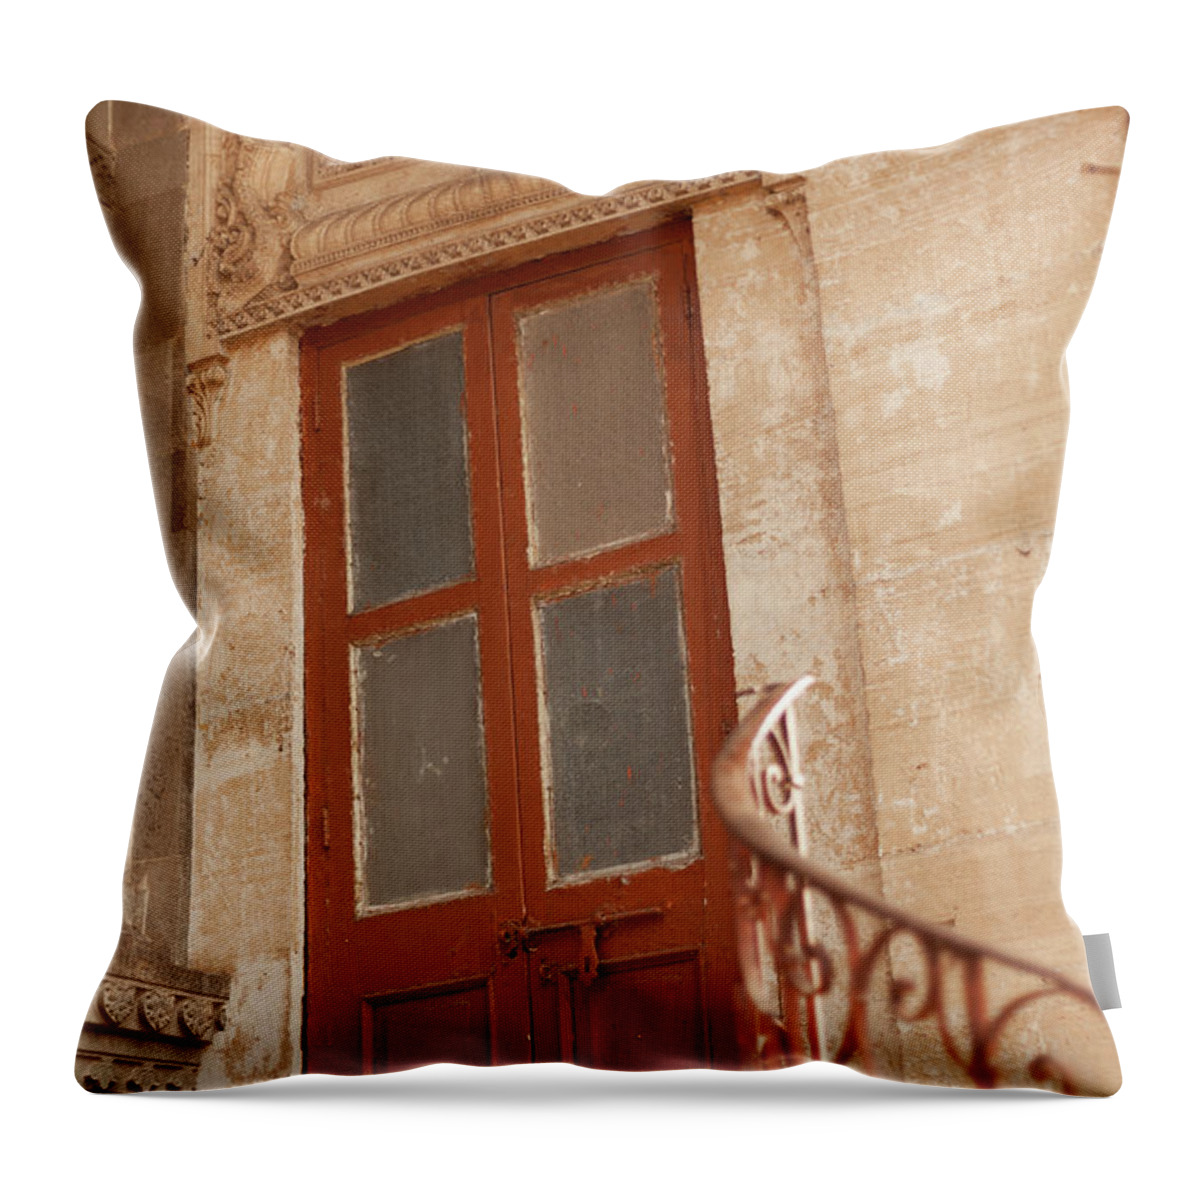 Doorway Throw Pillow featuring the photograph Shinde Chhatri Door by Fran Riley